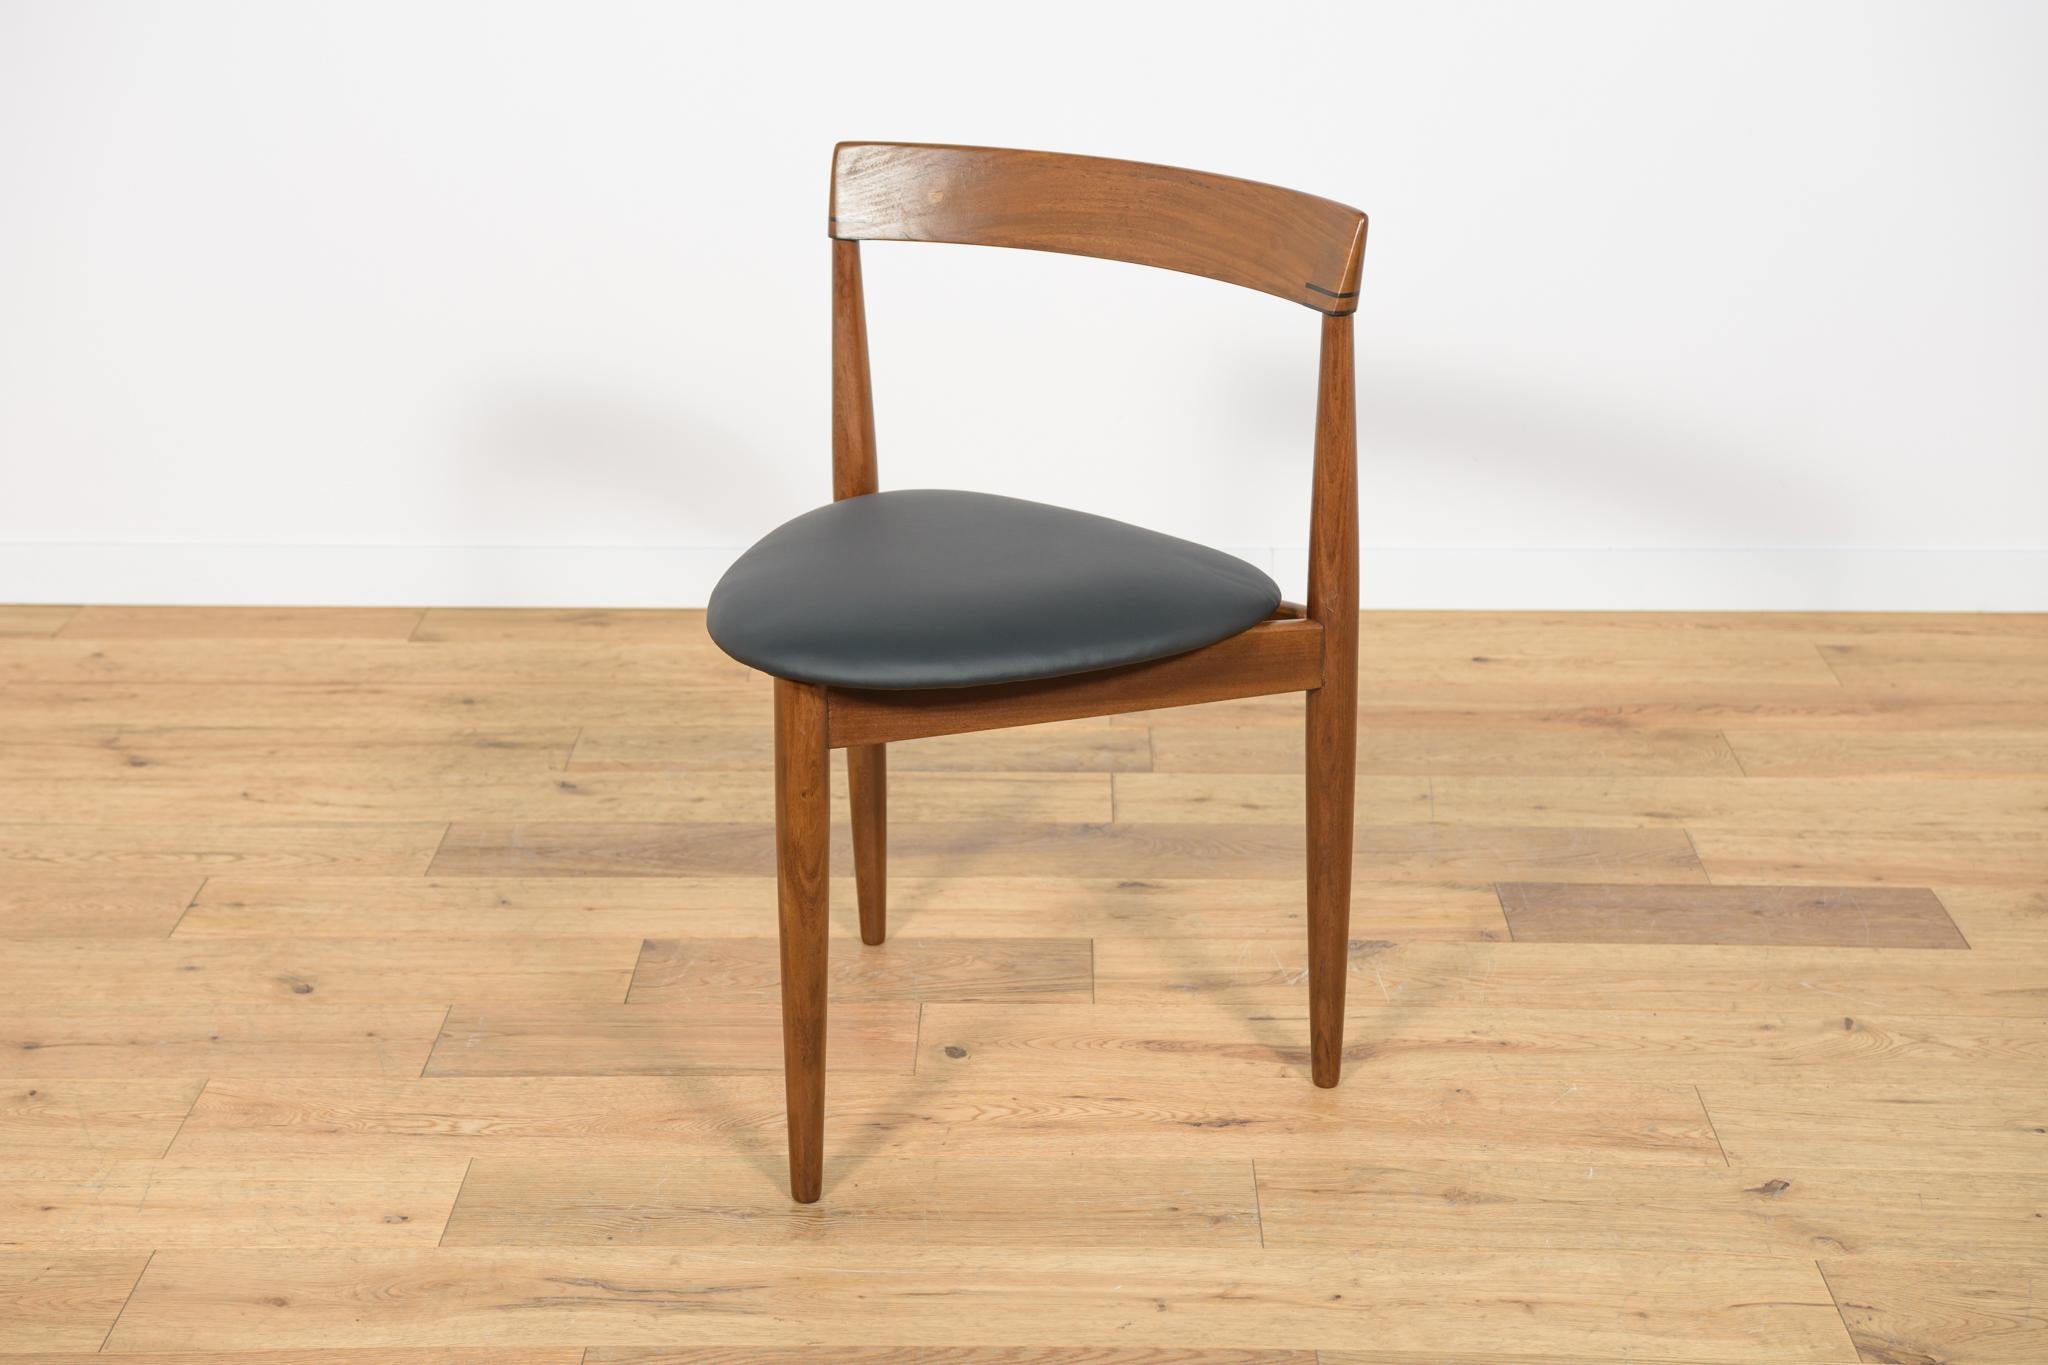  Mid-Century Teak Dining Table and Chairs Set by Hans Olsen for Frem Røjle. For Sale 1